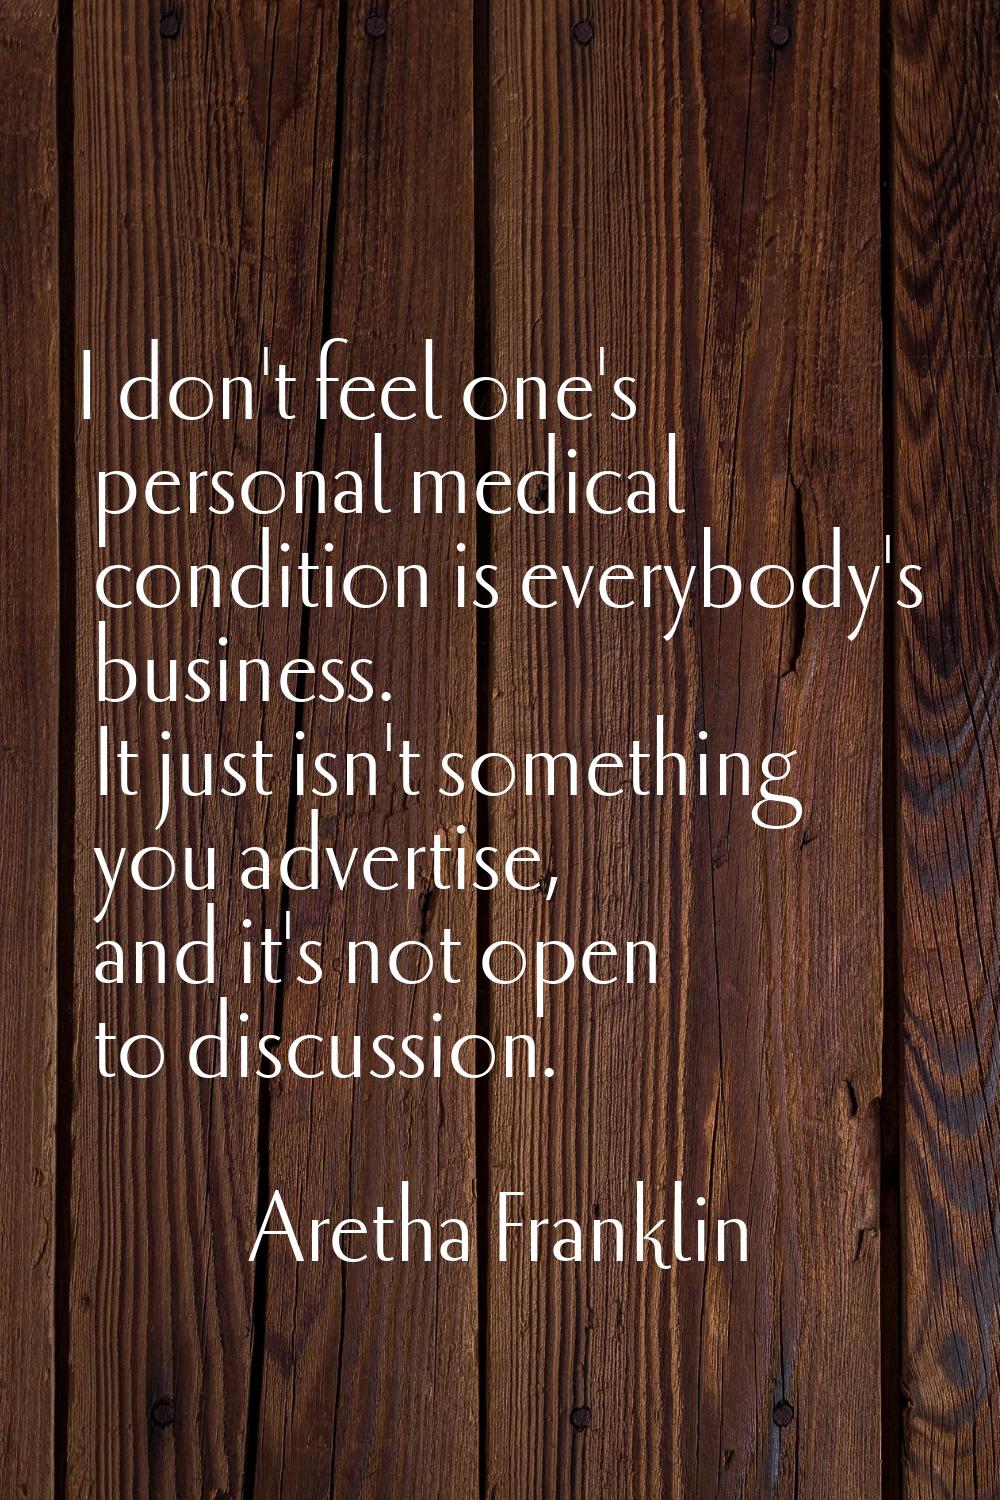 I don't feel one's personal medical condition is everybody's business. It just isn't something you 